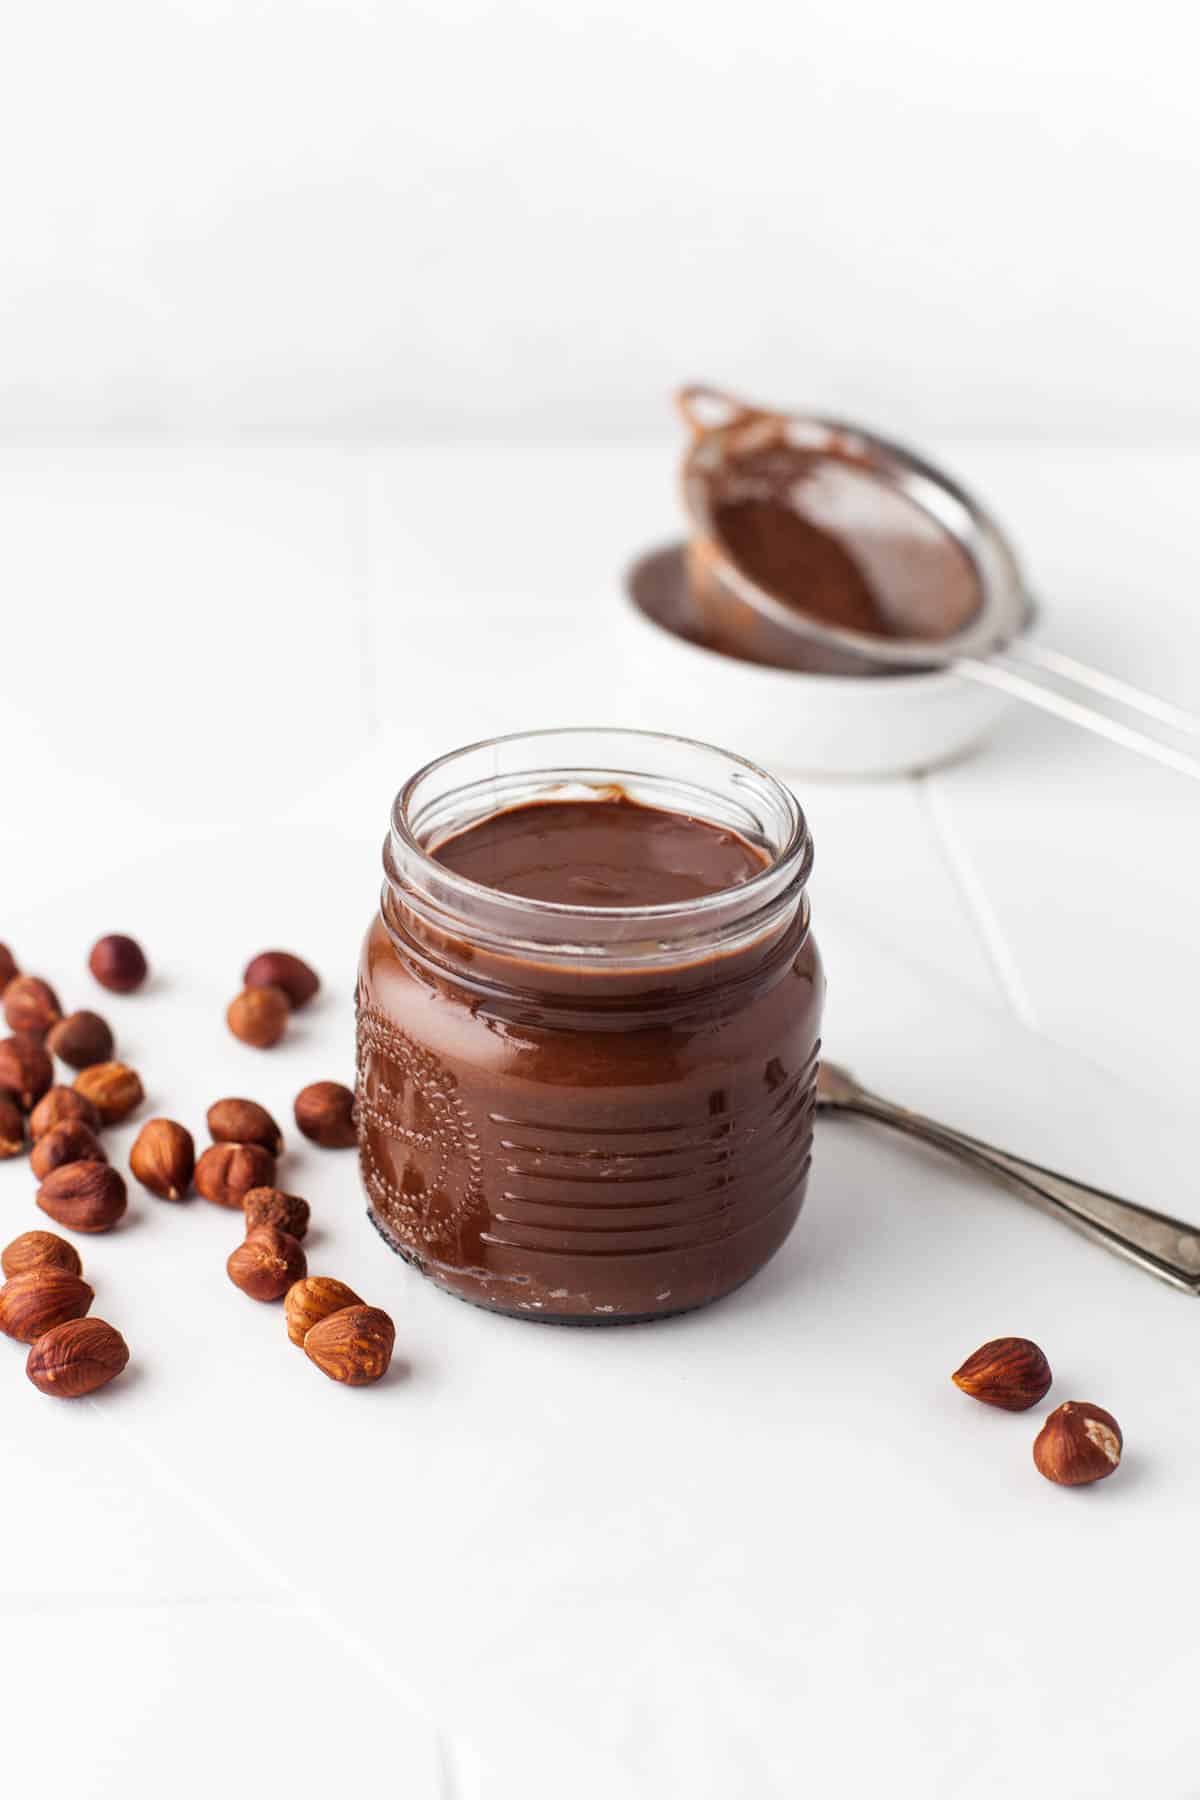 Whole toasted hazelnuts next to a jar of Homemade Nutella.